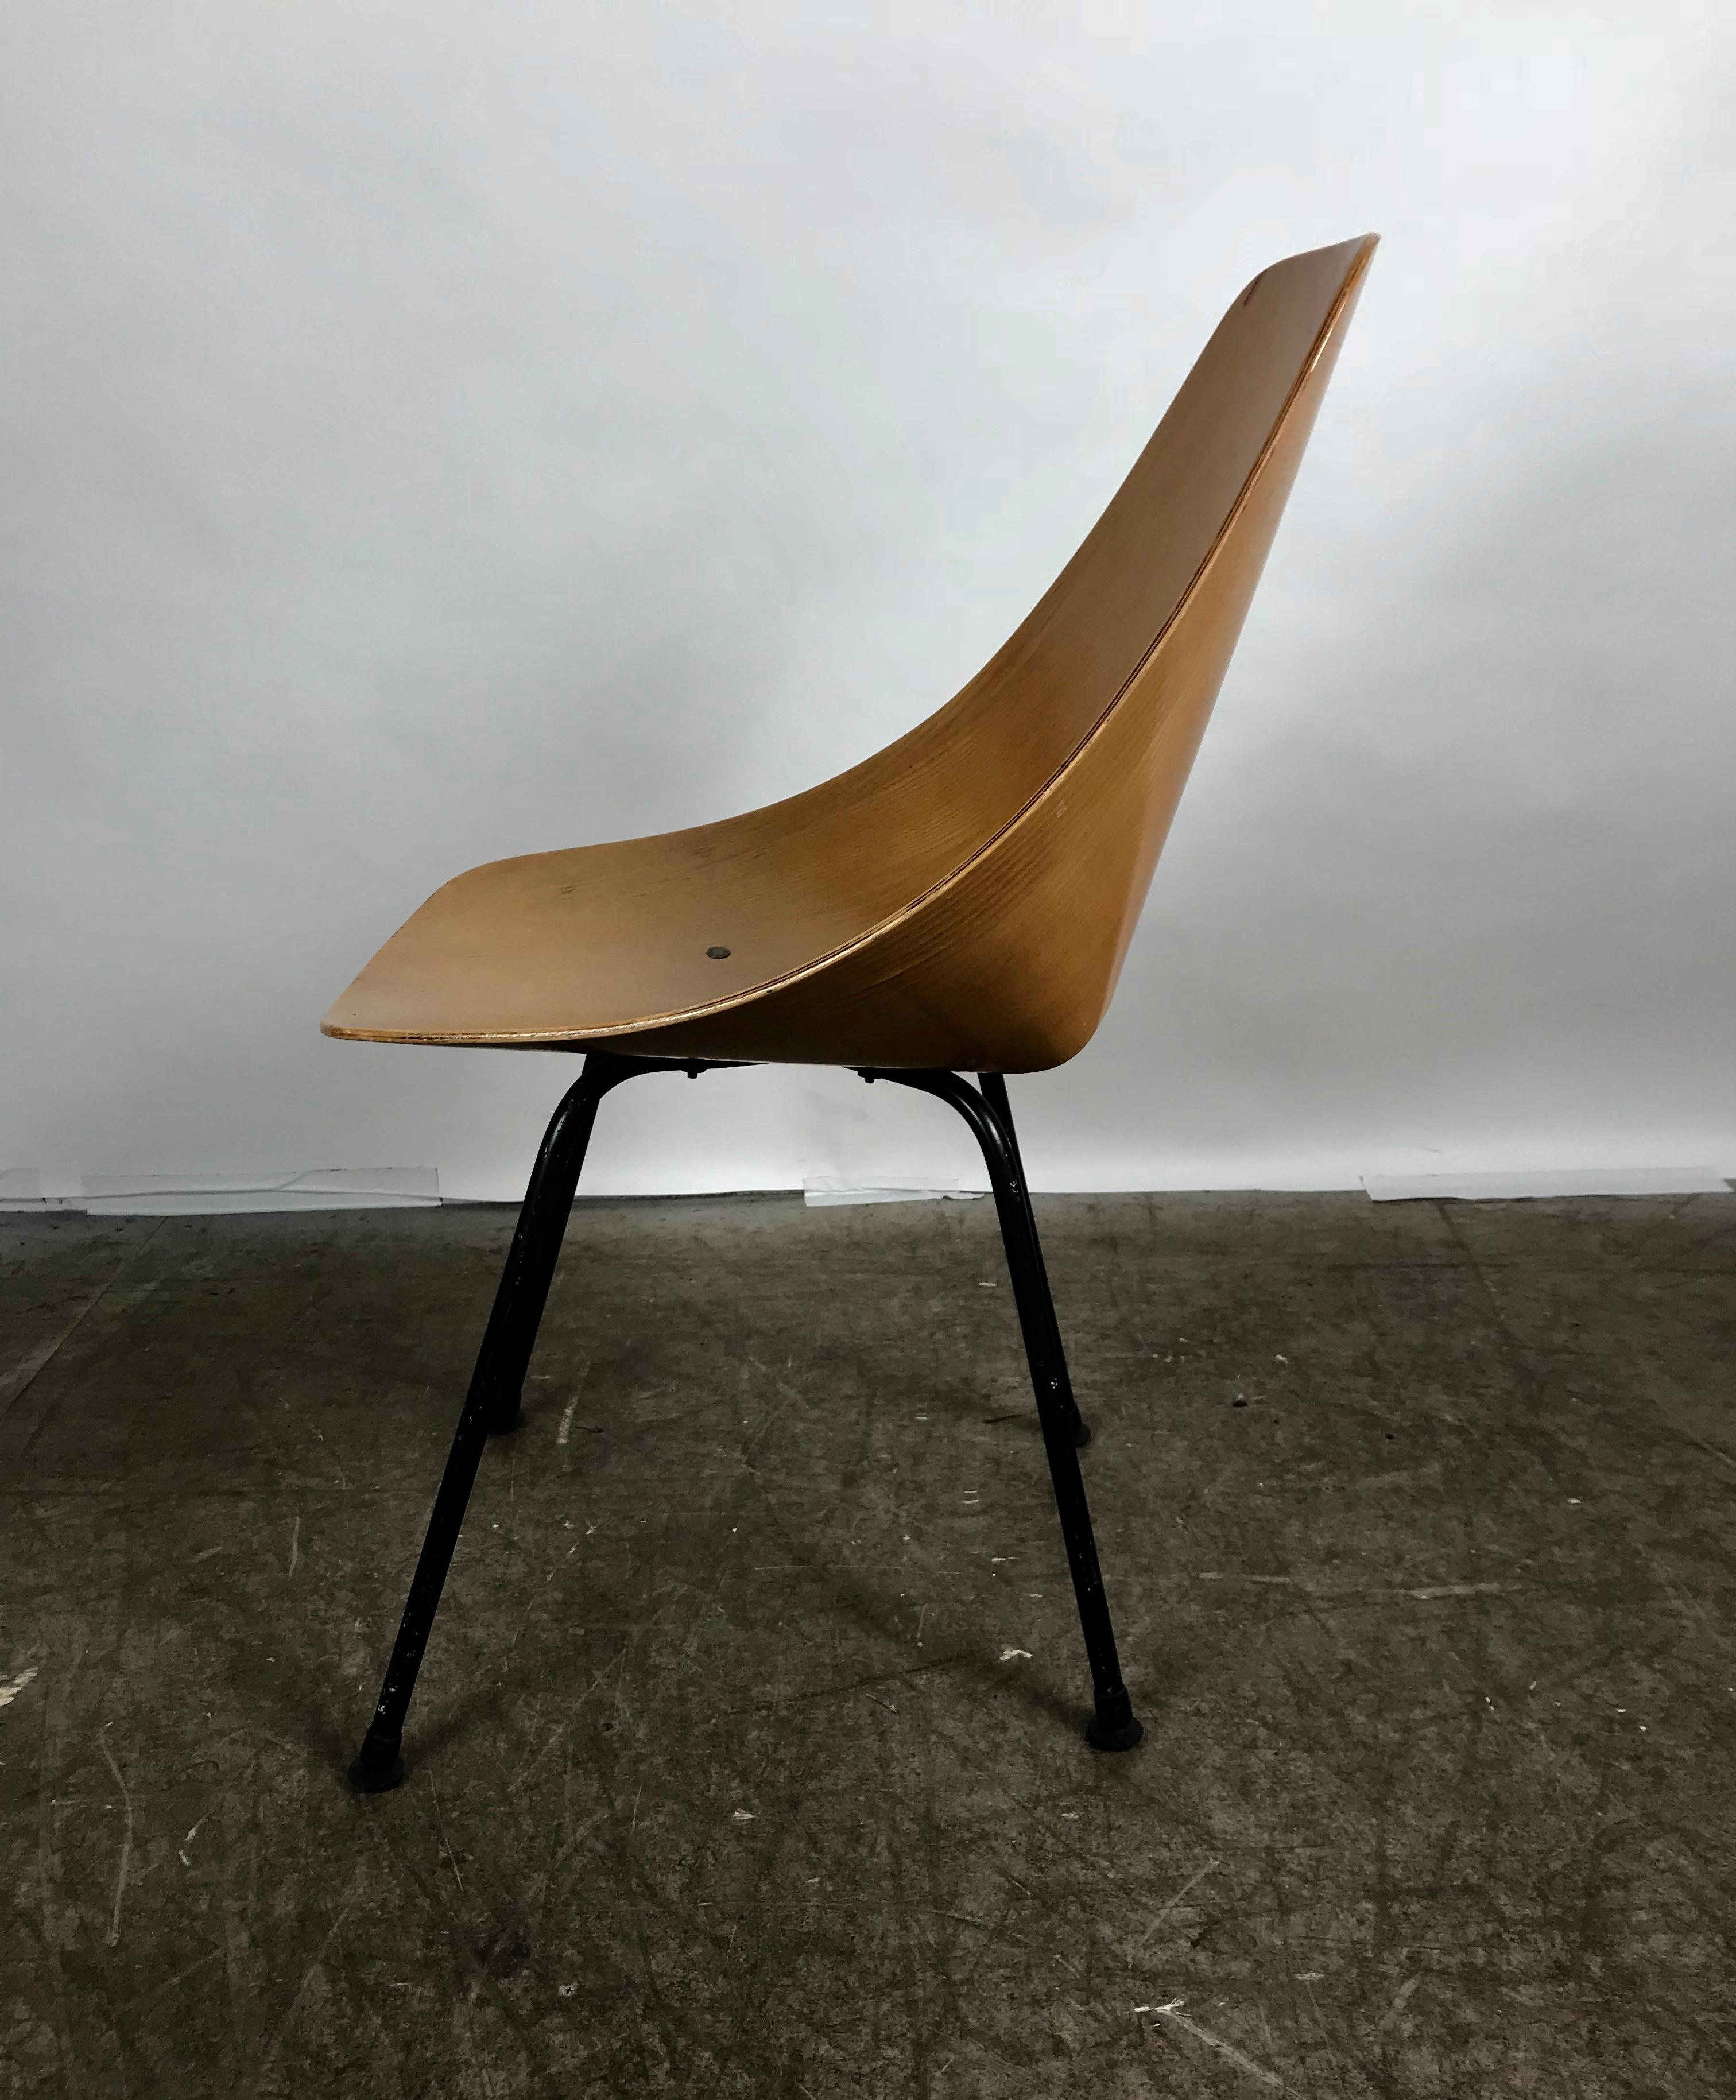 Stunning Italian modernist side chair by Vittorio Nobili for Fratelli Tagliabue, perfect little accent chair, sculpture, retains its original patina, color and surface, minor veneer chipping but can have professionally restored at buyers request.